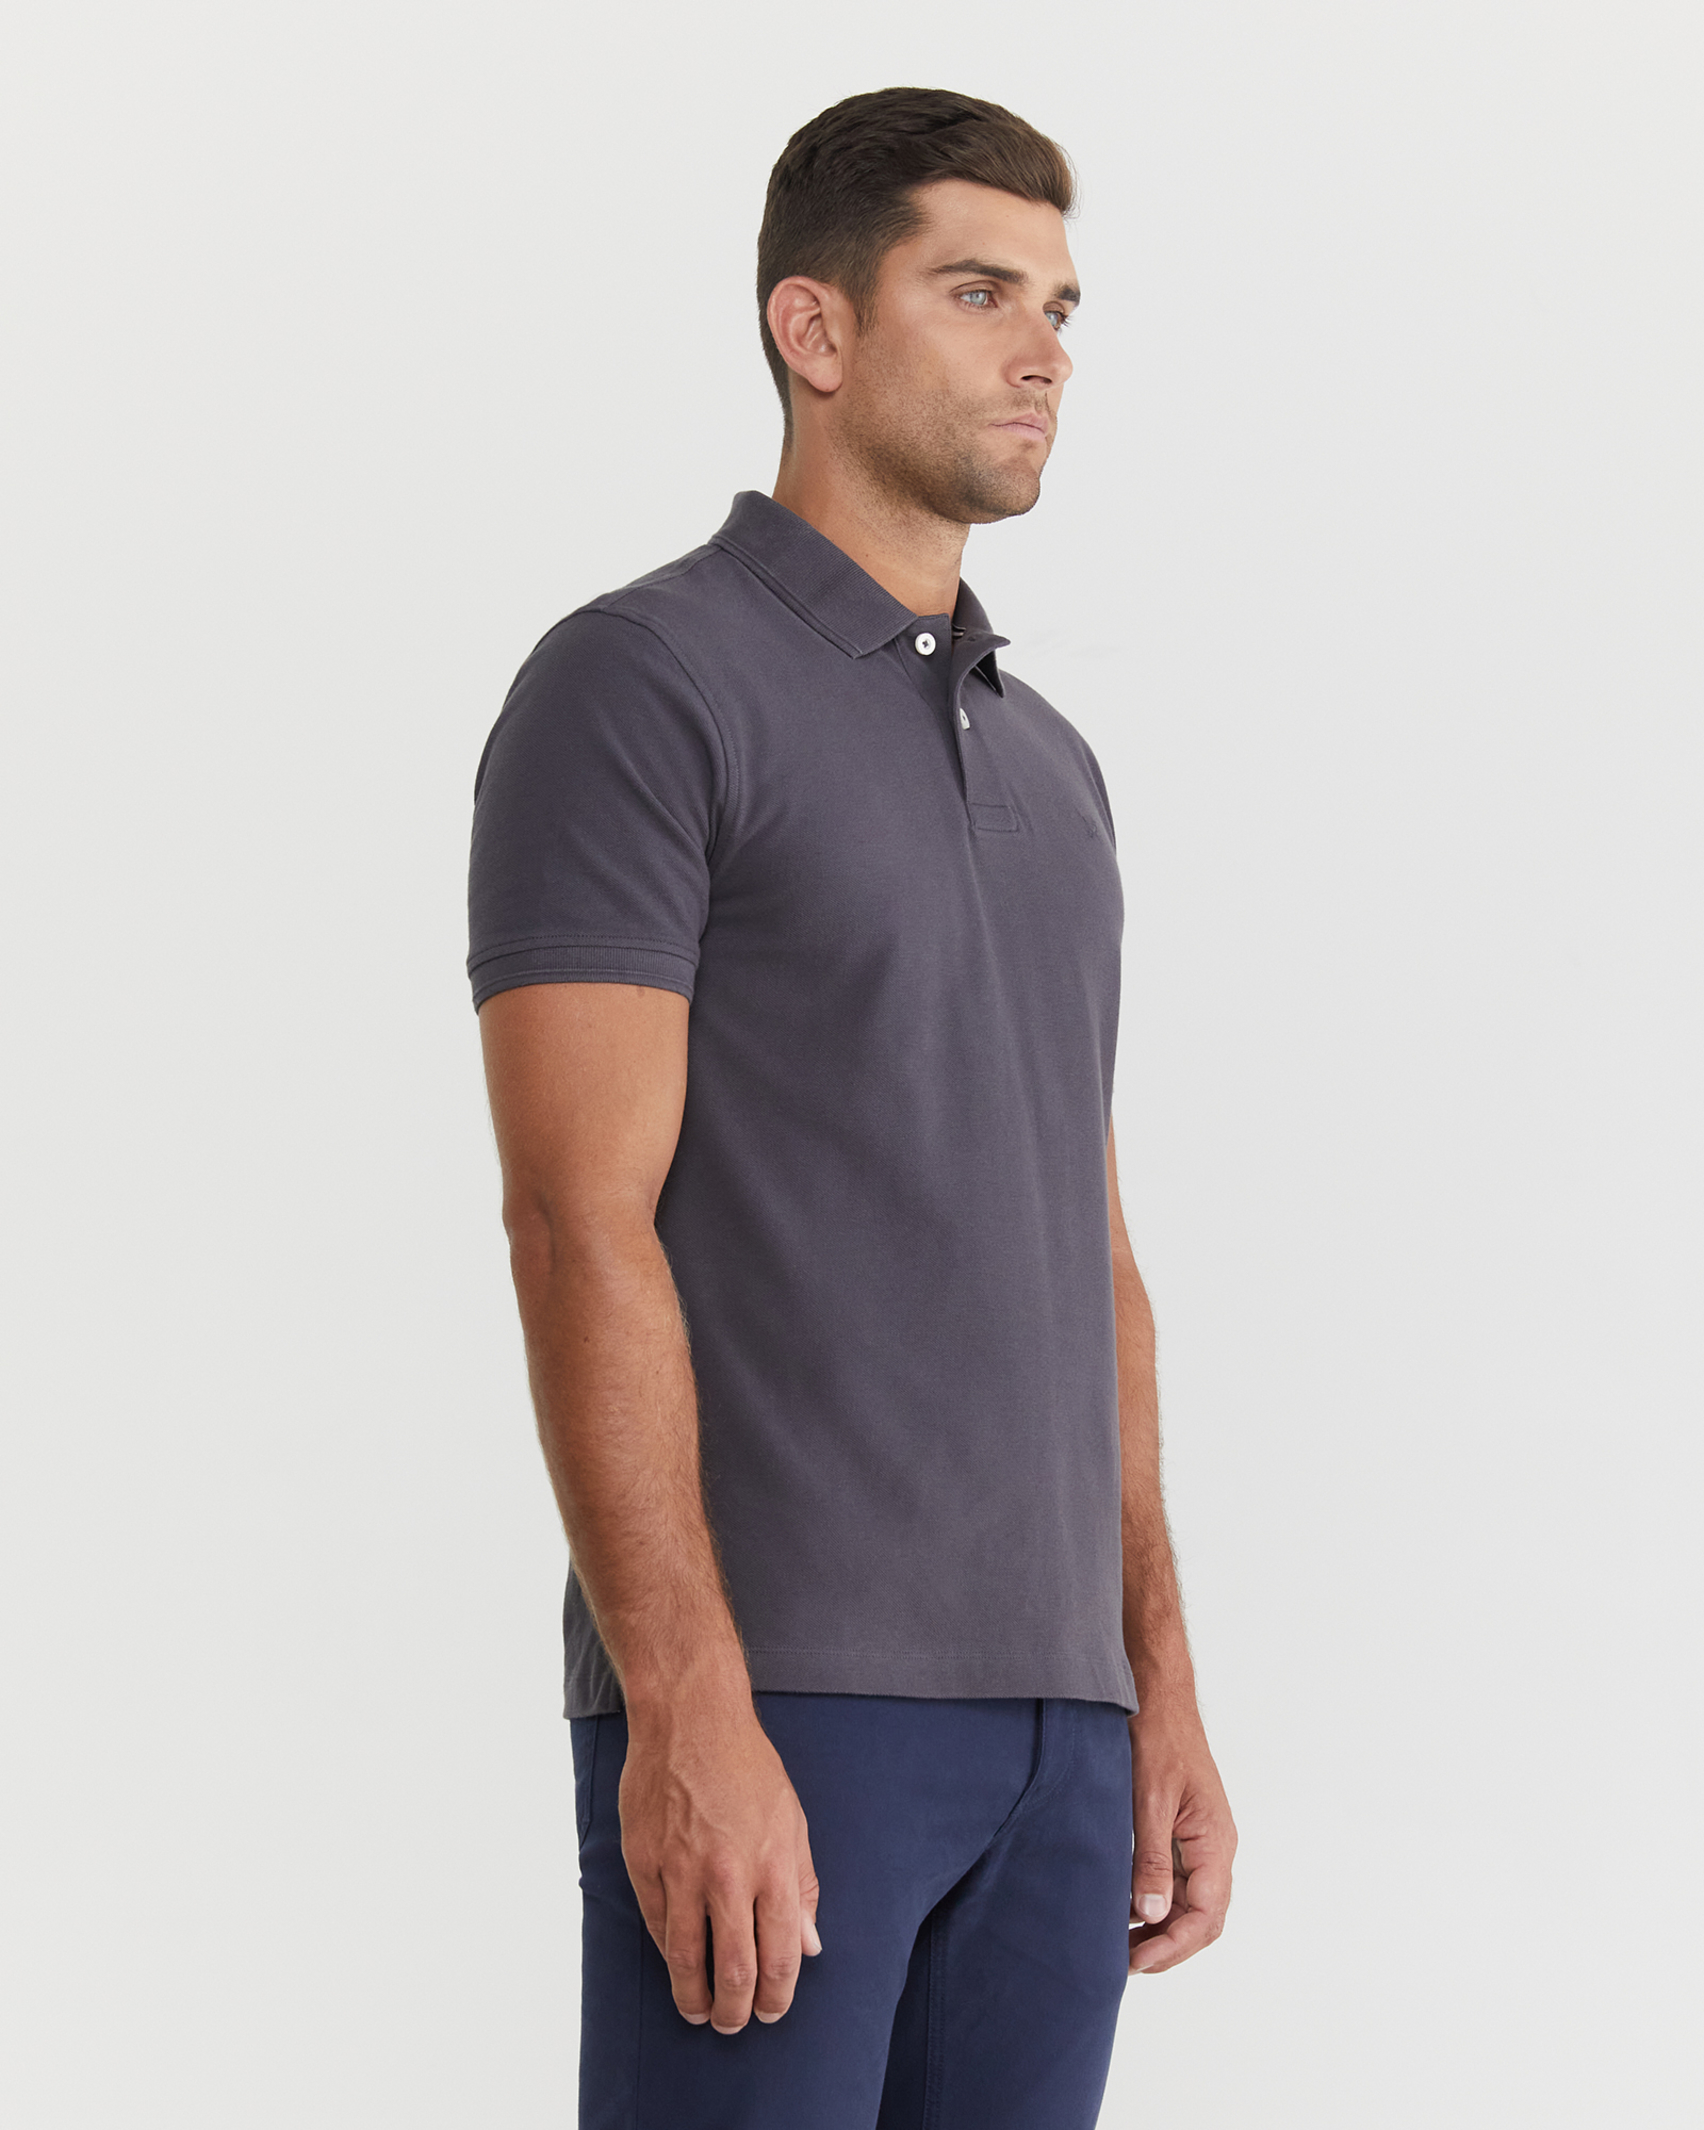 Pique Polo in CHARCOAL